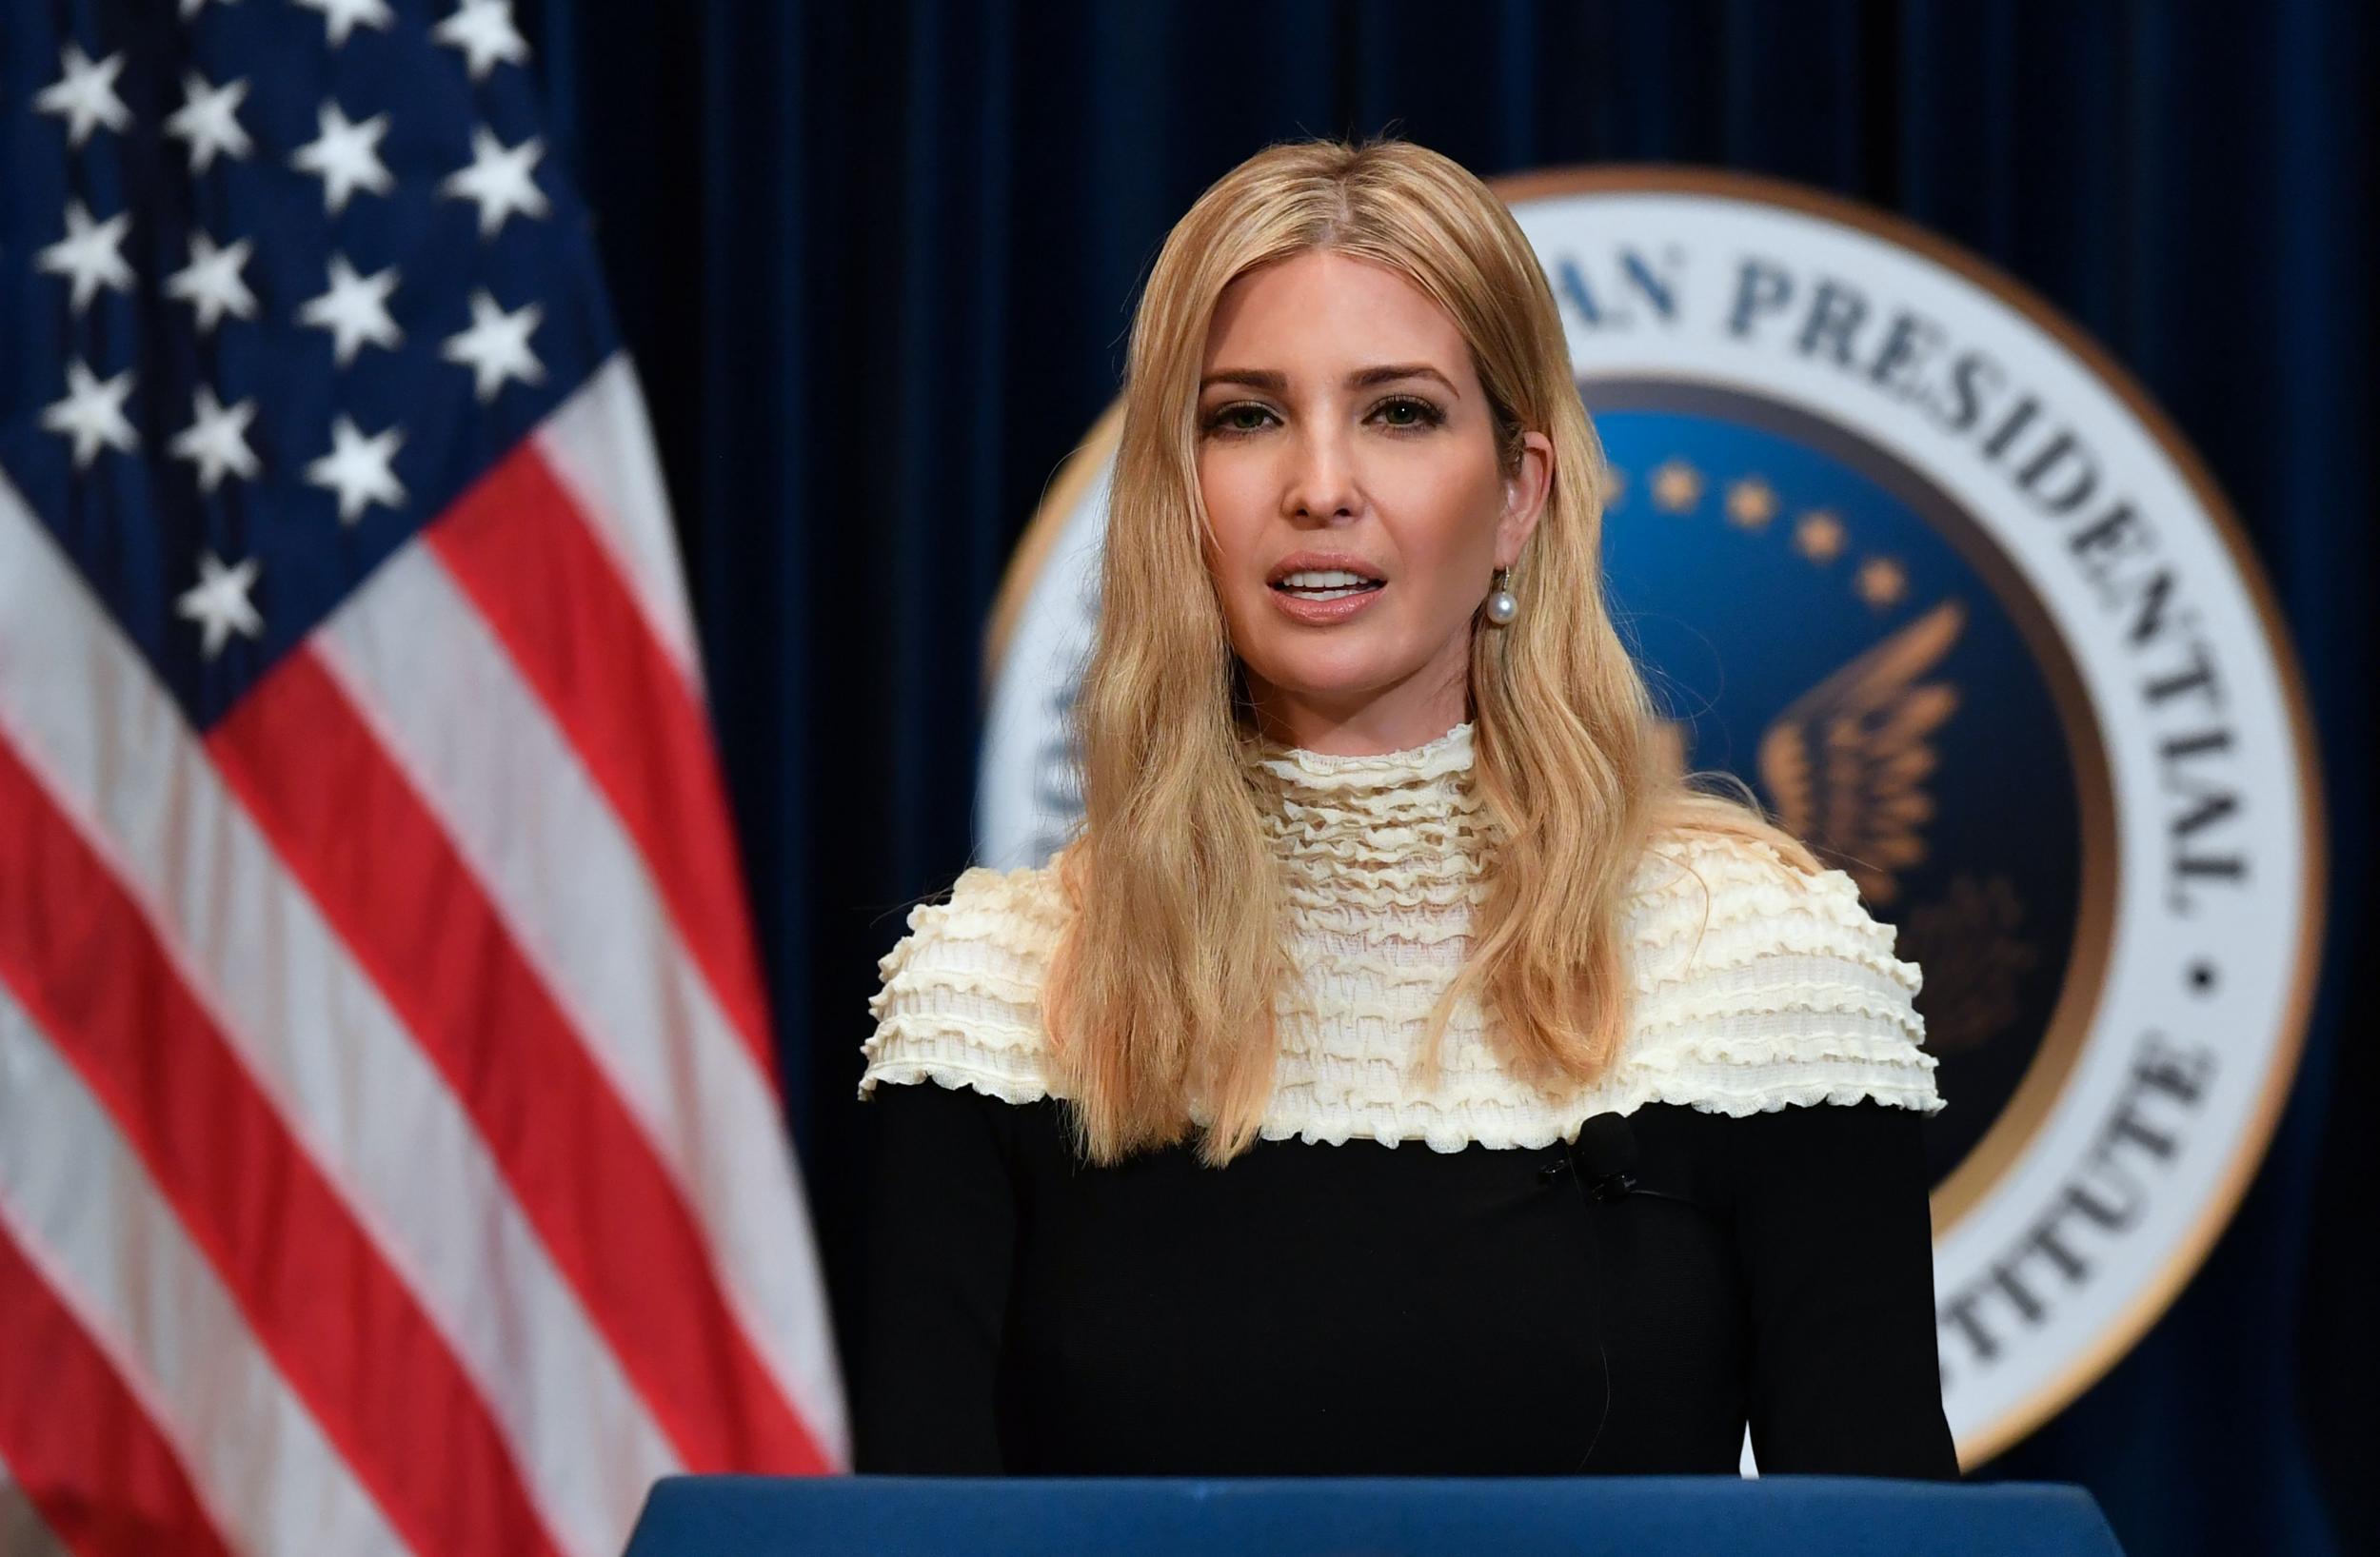 Advisor to US President Donald Trump, his daughter Ivanka Trump, speaks at a fireside chat on tax reform